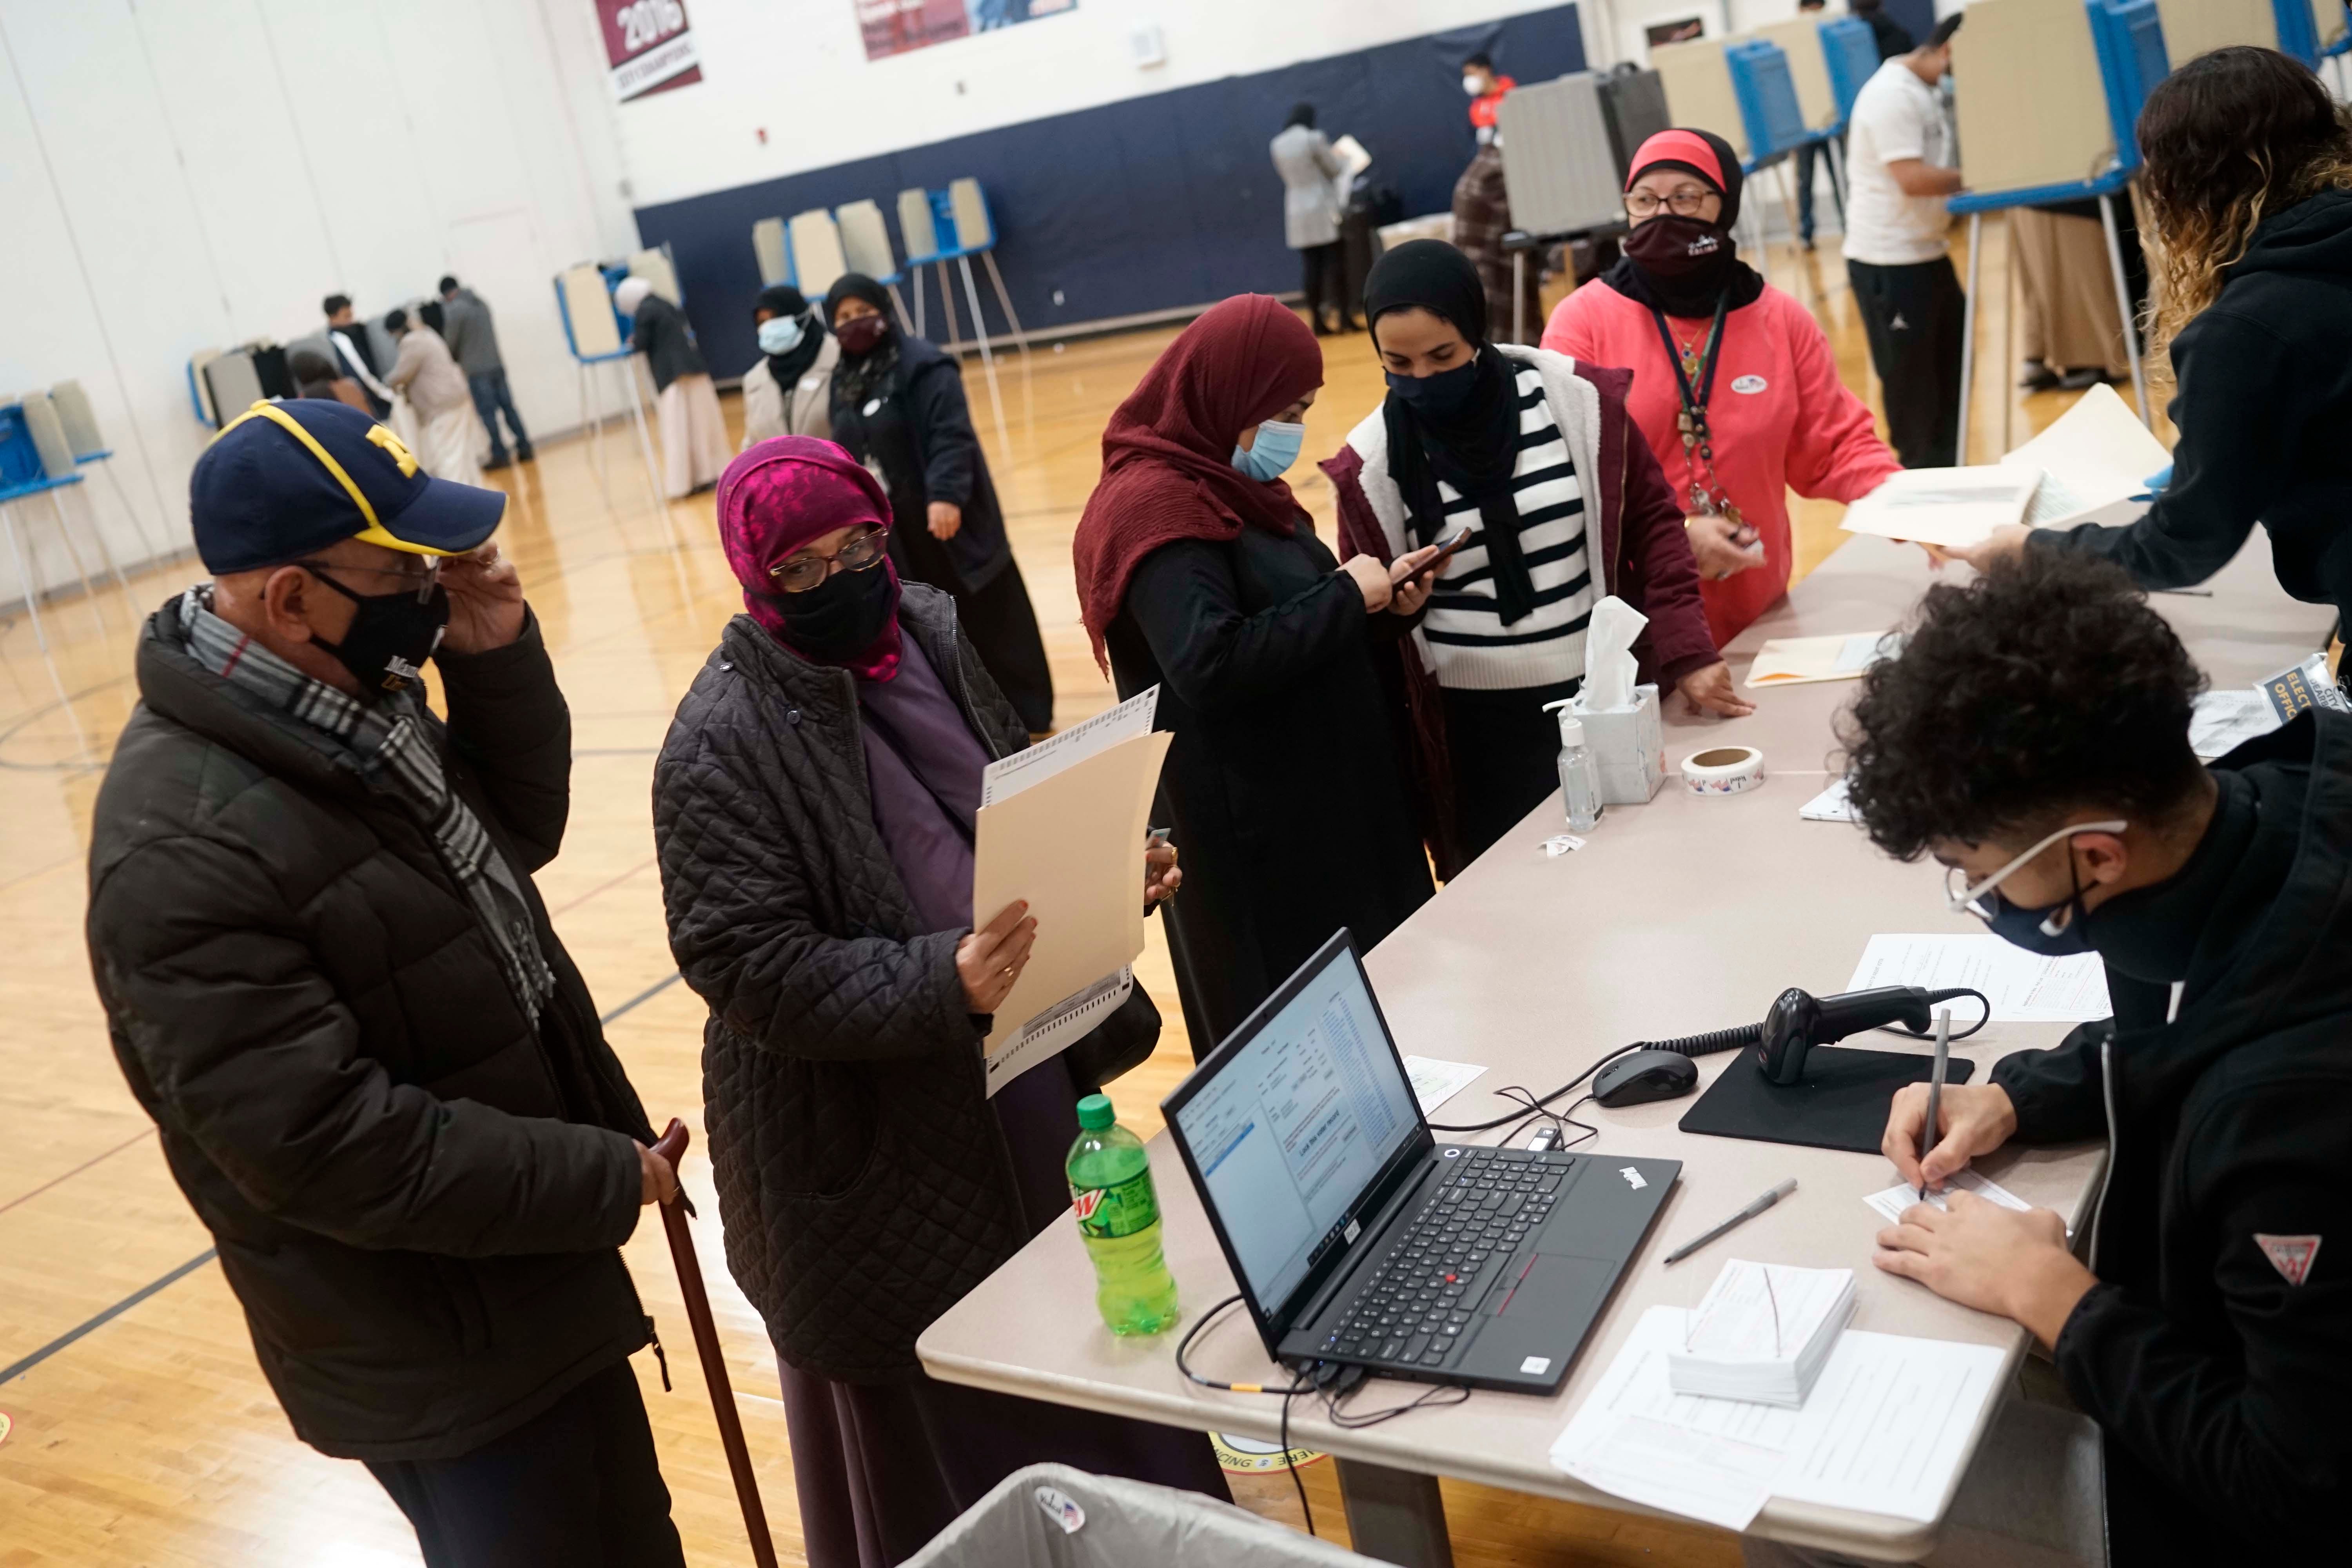 Dawleh Ahmed, left center, and Naji Ahmed, left, wait in line to vote at Salina Elementary School on Nov. 3, 2020, in Dearborn, Mich.